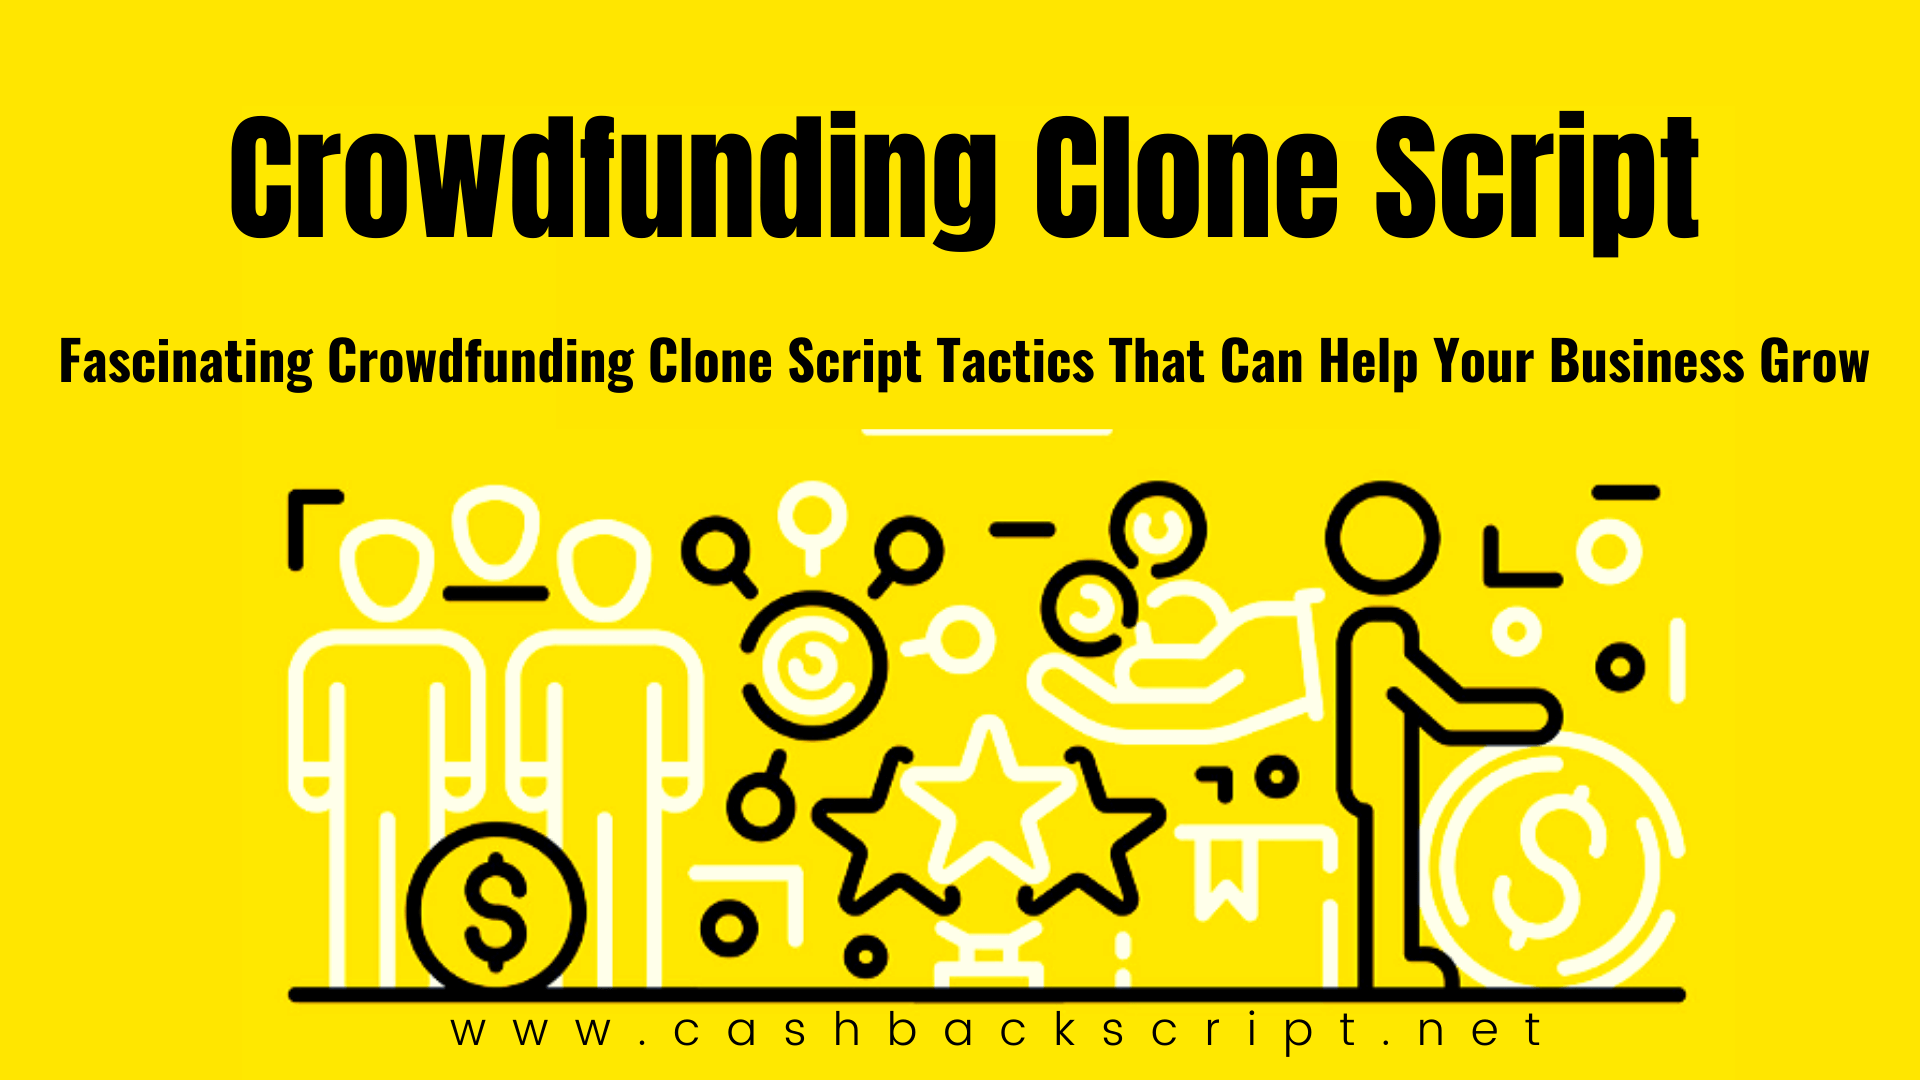 Fascinating Crowdfunding Clone Script Tactics That Can Help Your Business Grow